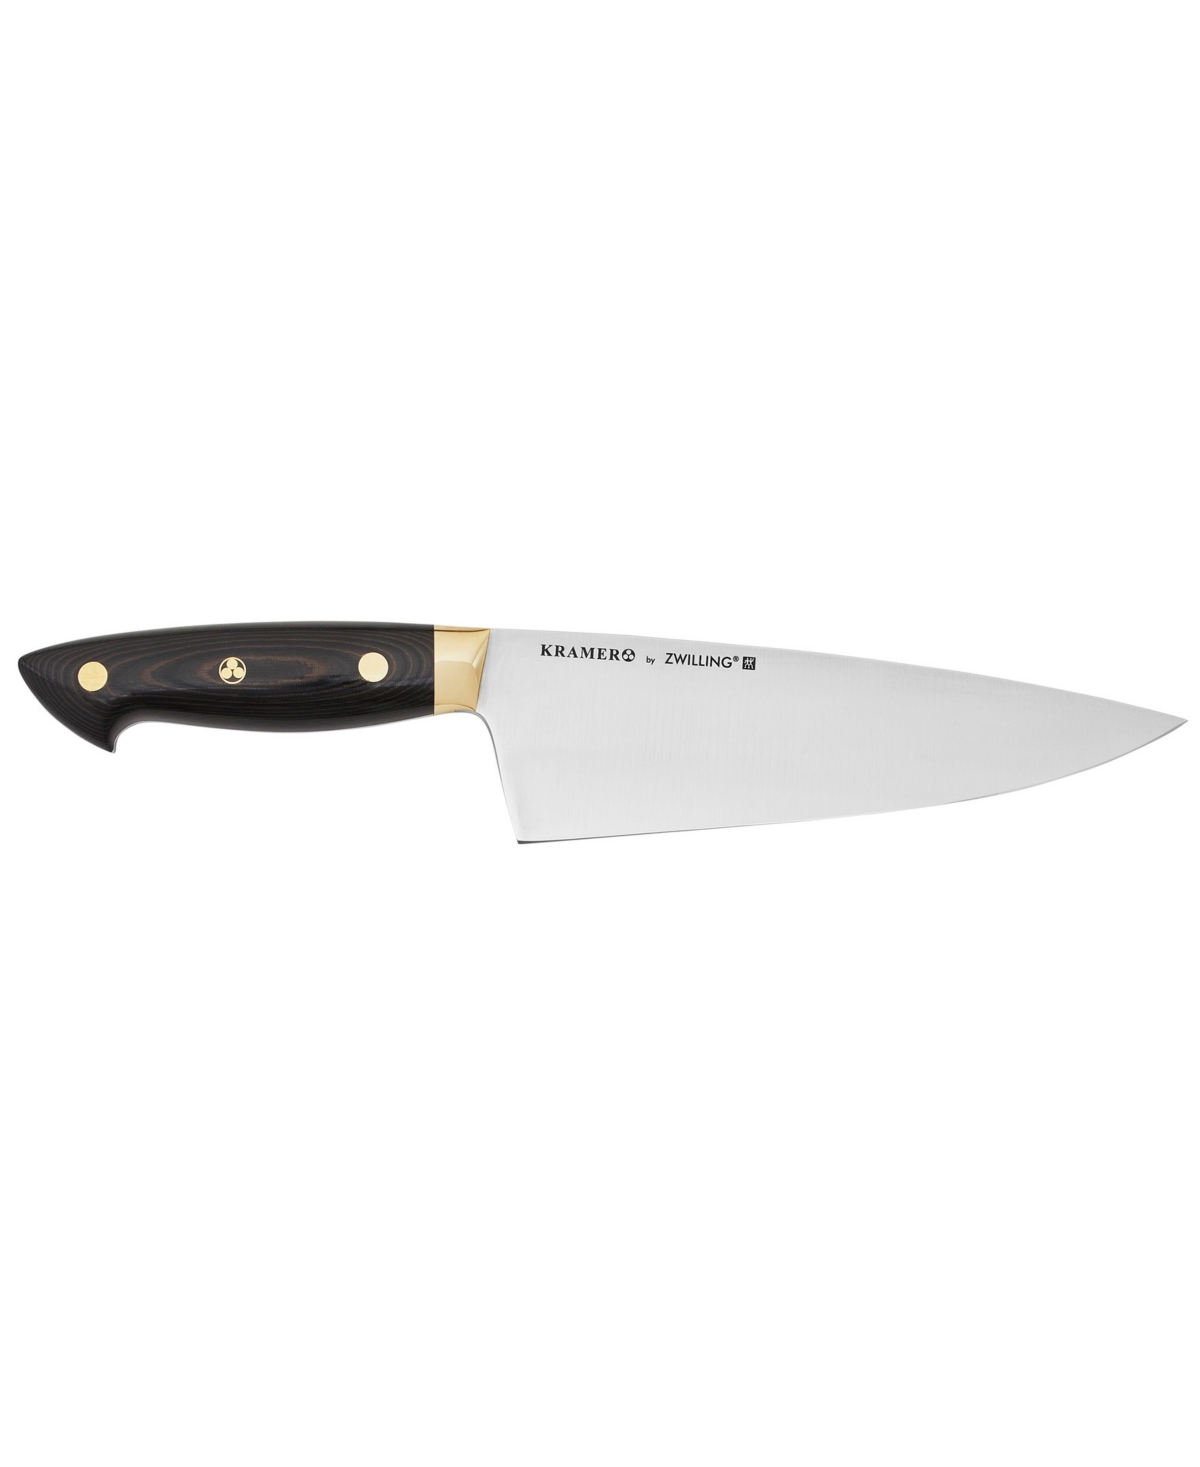 Zwilling Bob Kramer Carbon 2.0 Chef's Knife, 6" In Brown And Silver-tone